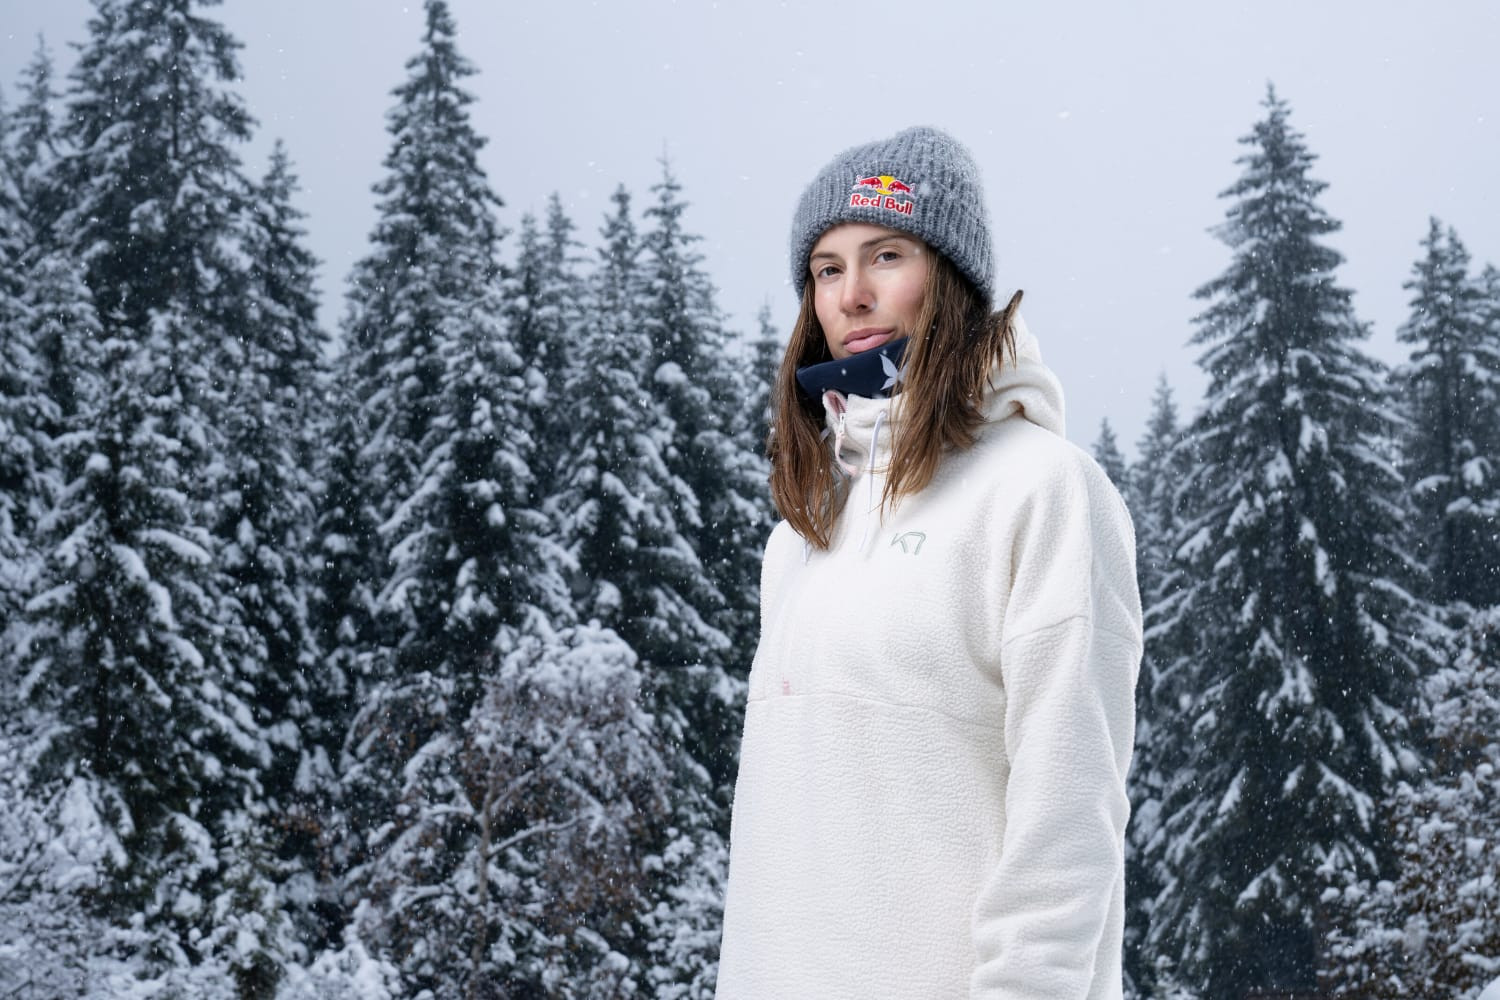 Eva Samková wants to put ecology and human development at the forefront of her plans if she is elected as a member of the IOC Athletes' Commission ©Red Bull